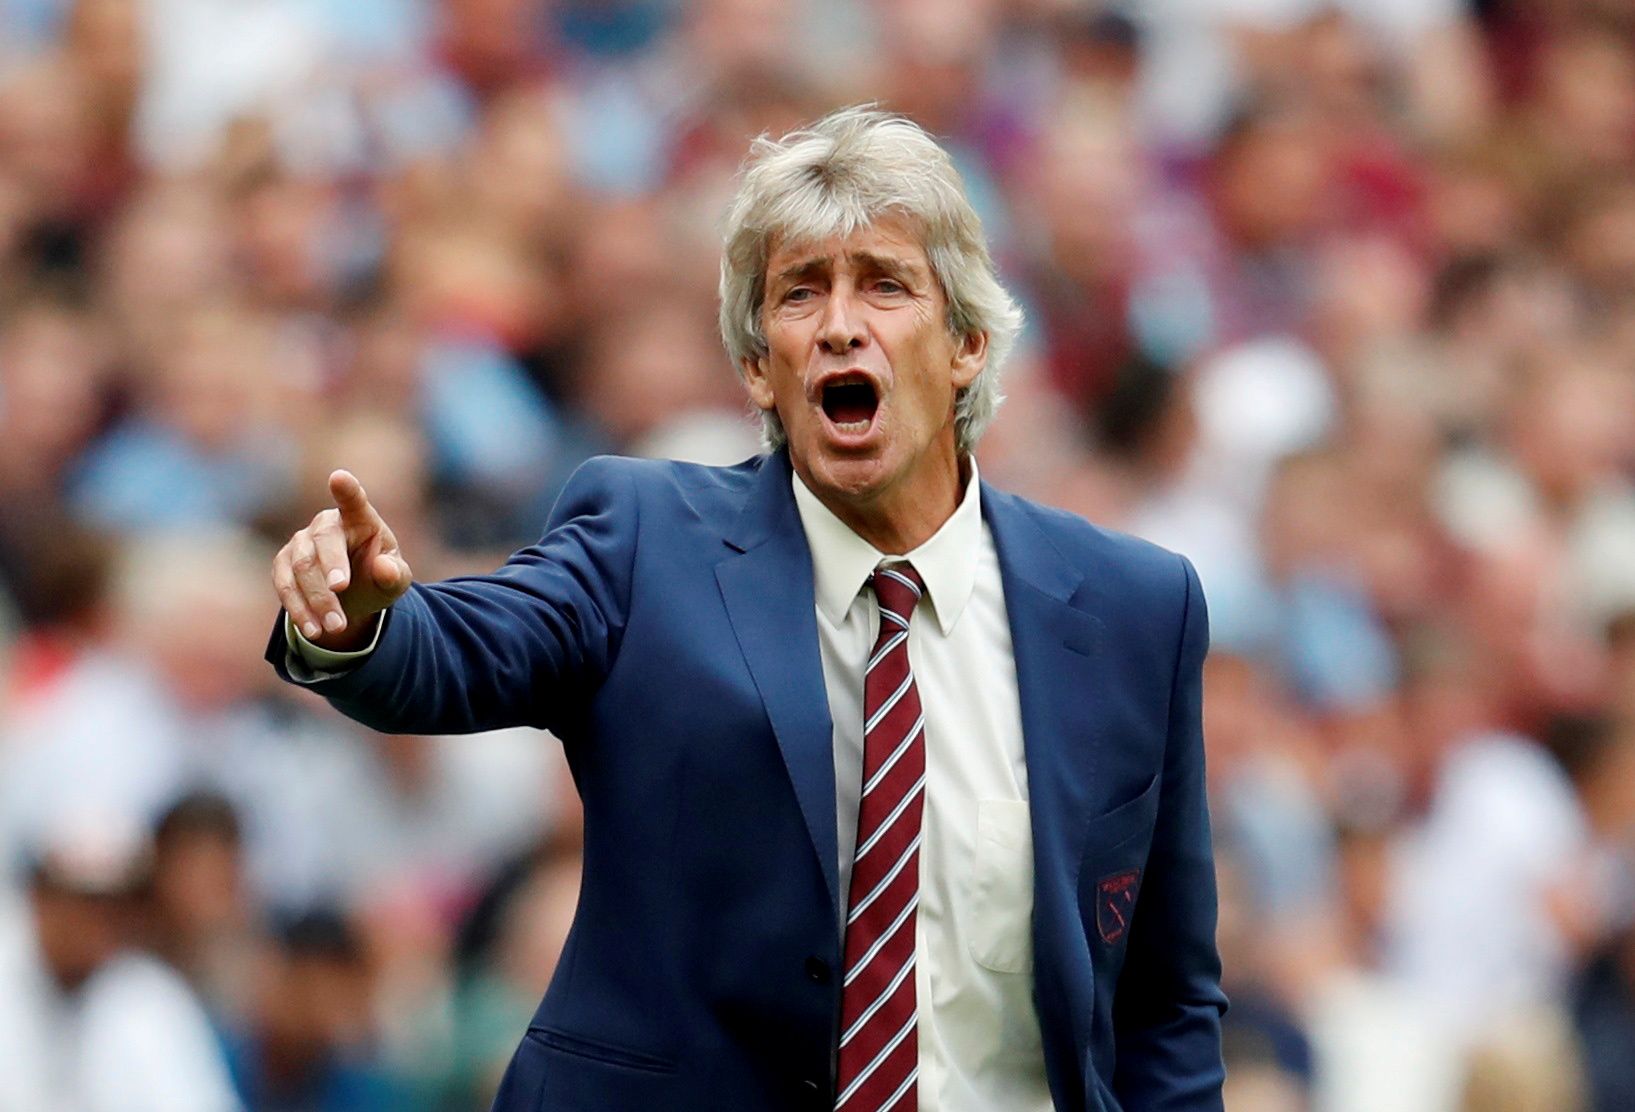 Soccer Football - Premier League - West Ham United v Norwich City - London Stadium, London, Britain - August 31, 2019    West Ham United manager Manuel Pellegrini gestures    Action Images via Reuters/Matthew Childs/File Photo   EDITORIAL USE ONLY. No use with unauthorized audio, video, data, fixture lists, club/league logos or 